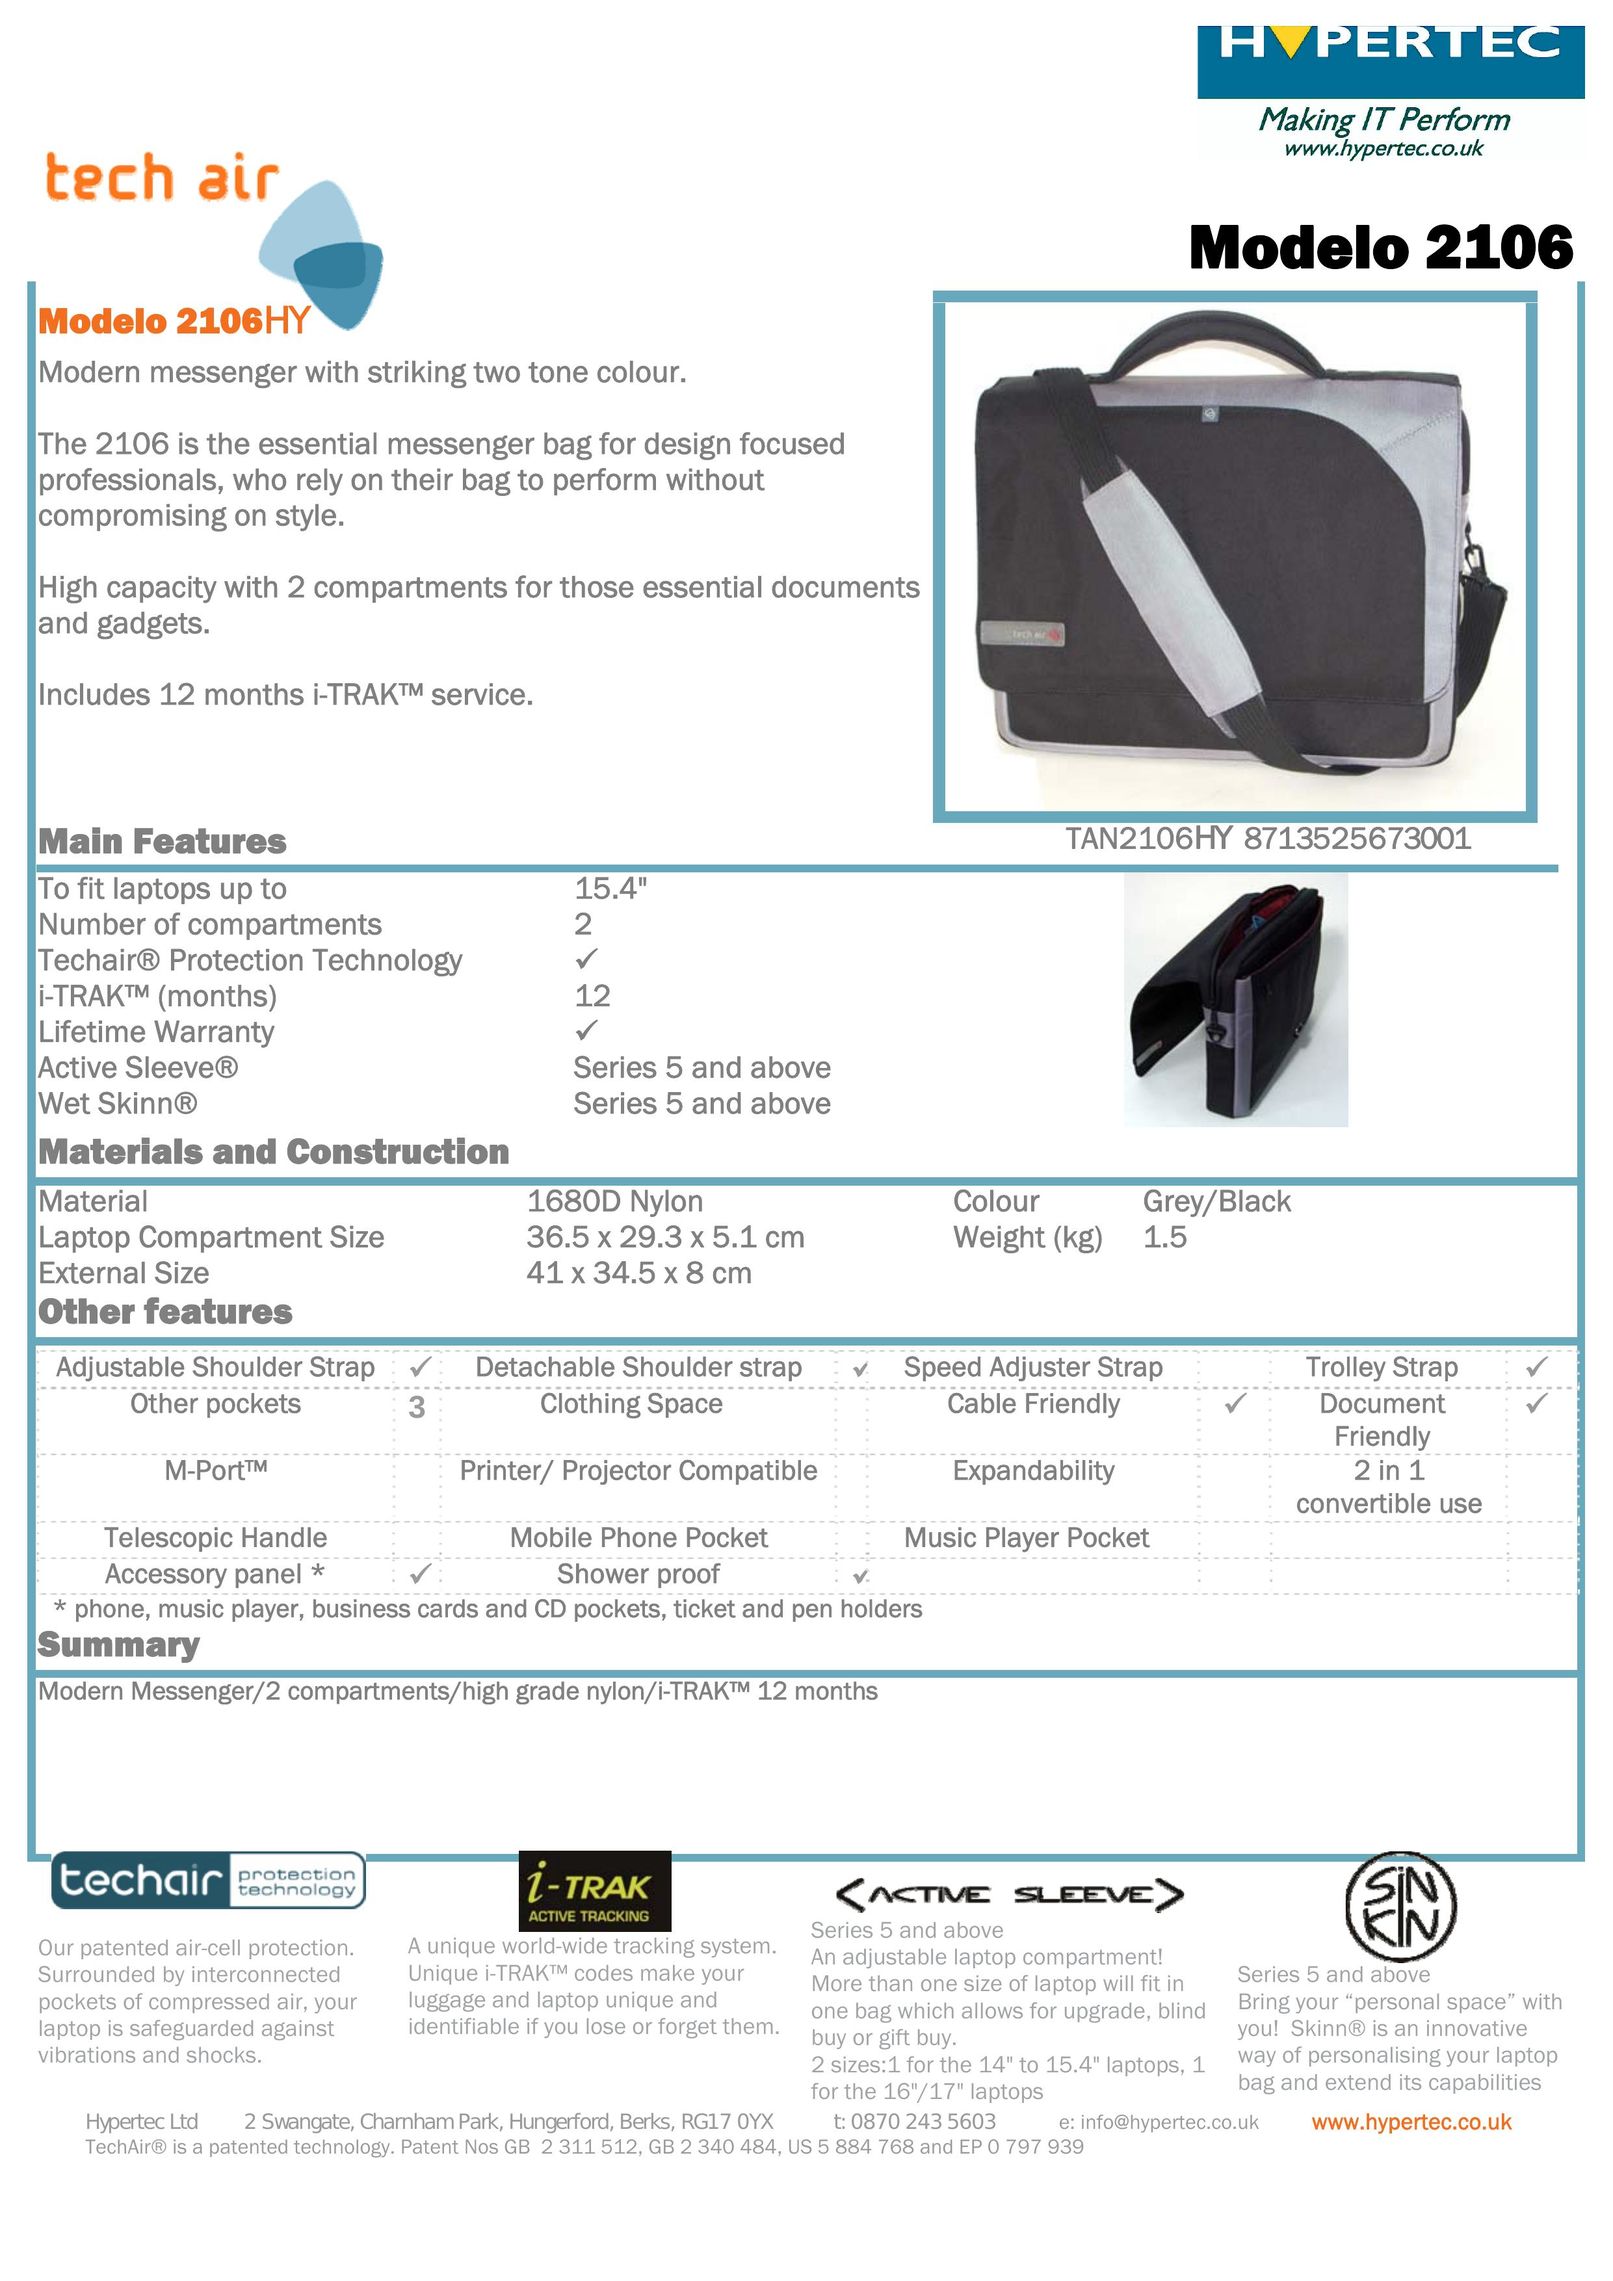 Hypertec 2106HY Carrying Case User Manual